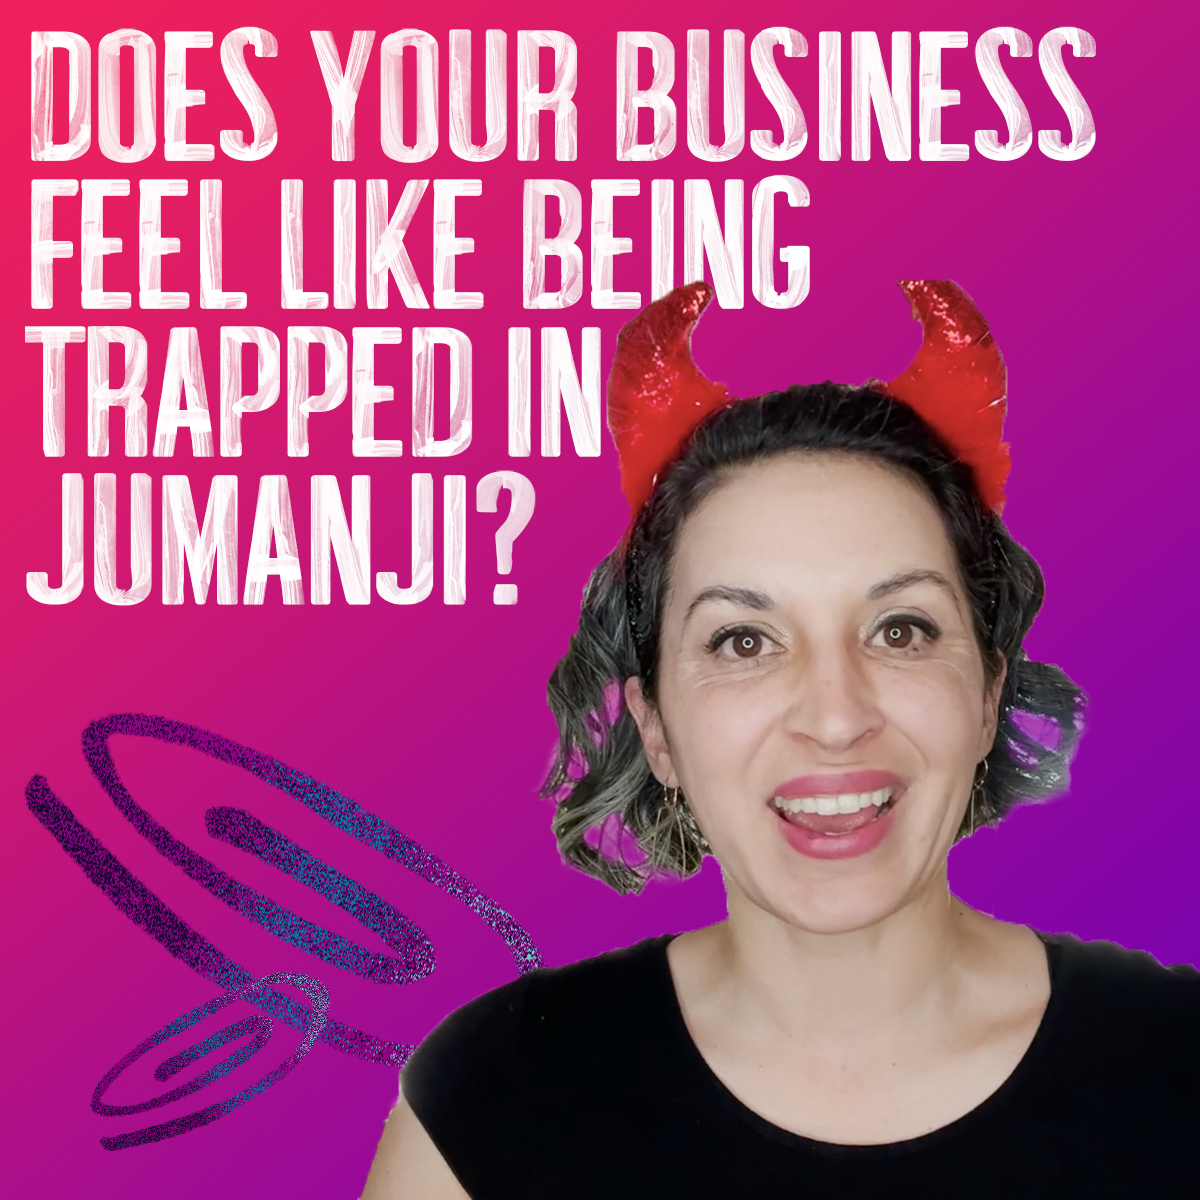 entrepreneur_overwhelm_does_your_business_feel_like_being_trapped_in_jumanji